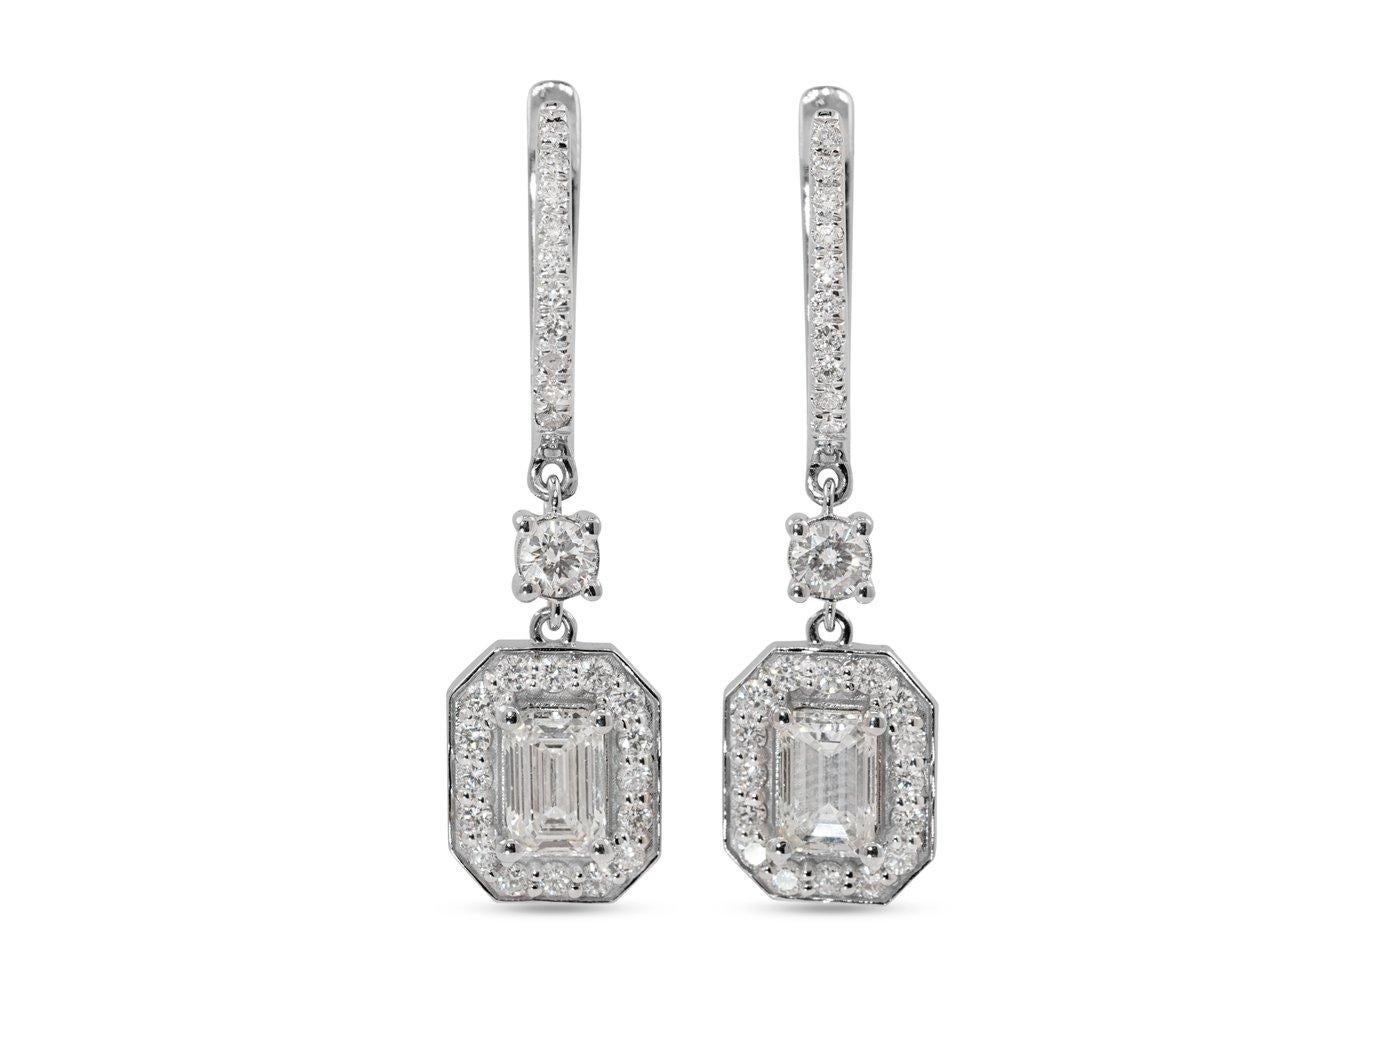 Stunning drop earring made from 18k white gold with 1.50 total carat of emerald cut diamond. This diamond comes with an GIA Certificate and a fancy box.

-2 diamond main stone of 0.50 ct. each, total: 1.00 ct.
Cut: Emerald
Color: H
Clarity: VVS1
Cut